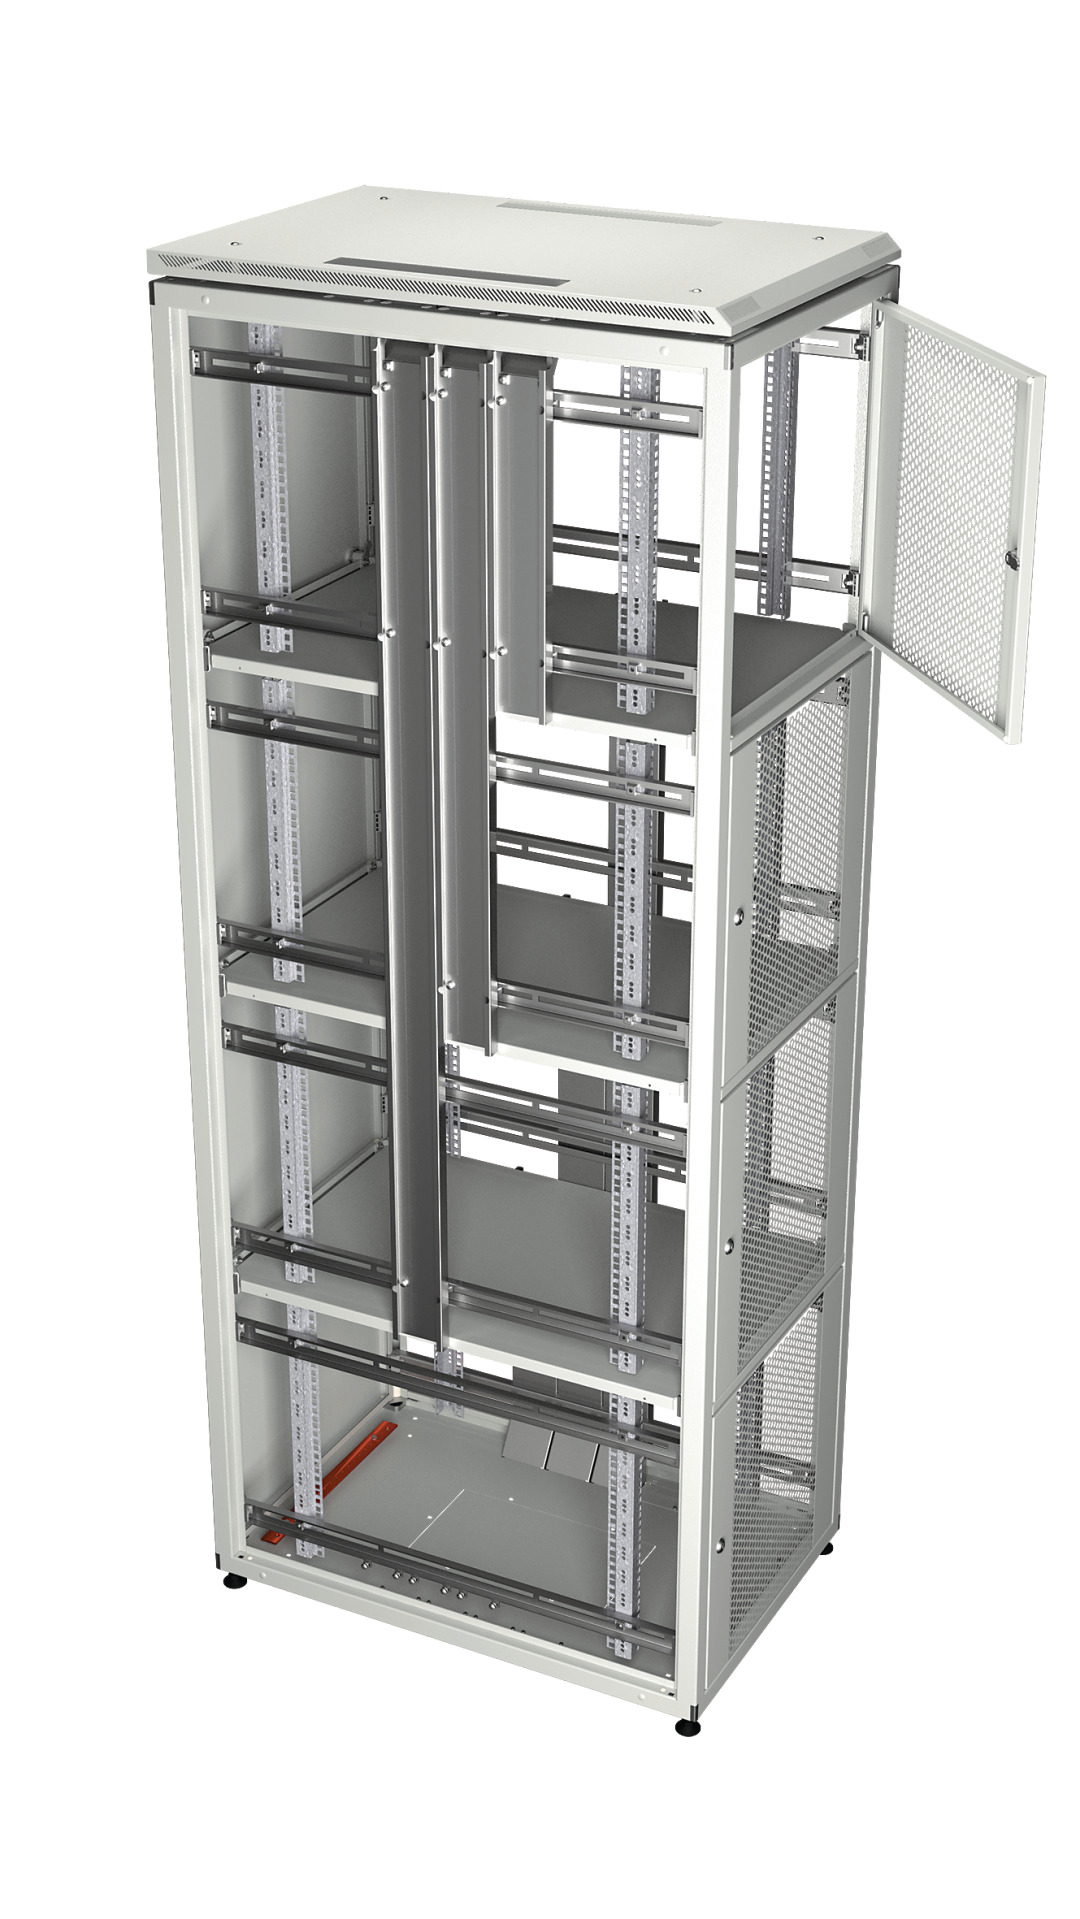 Co-Location Rack PRO, 1x23U+2x11U, 600x1000 mm, F+R 1-Part Perforated, RAL7035